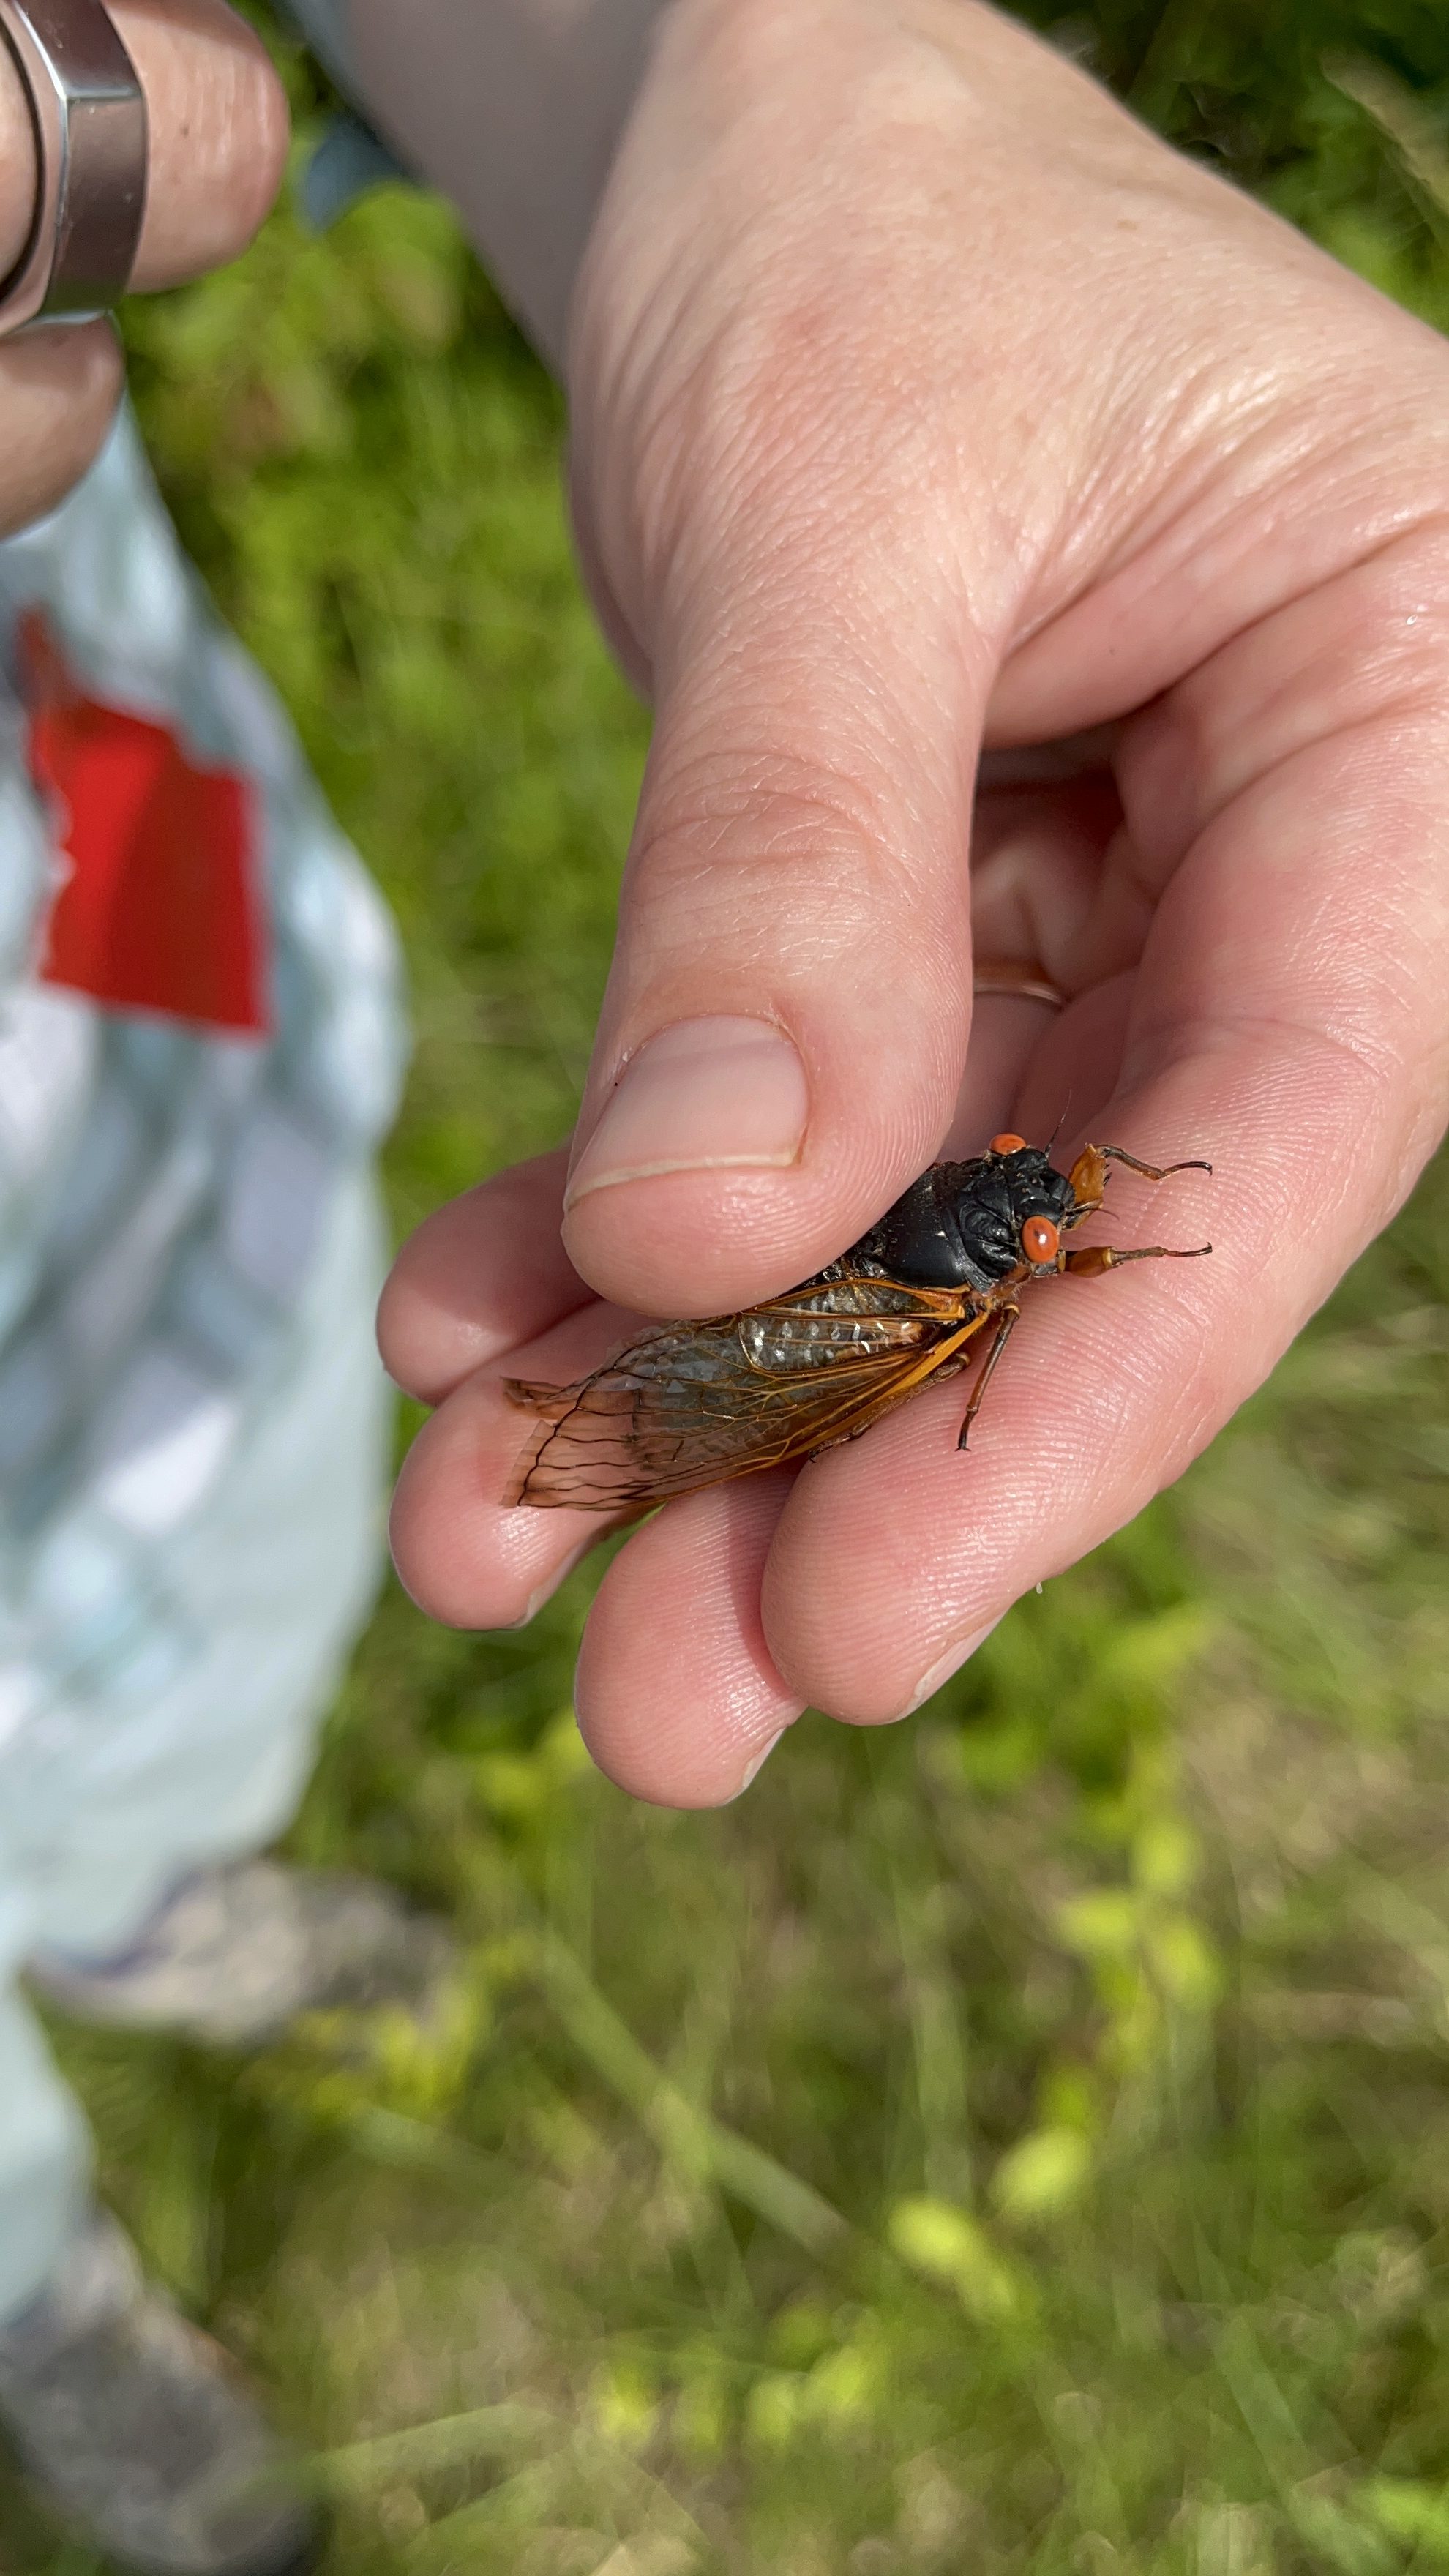 Kasey Fowler-Finn holds a periodical red-eyed cicada between their thumb and the end of their fingers.